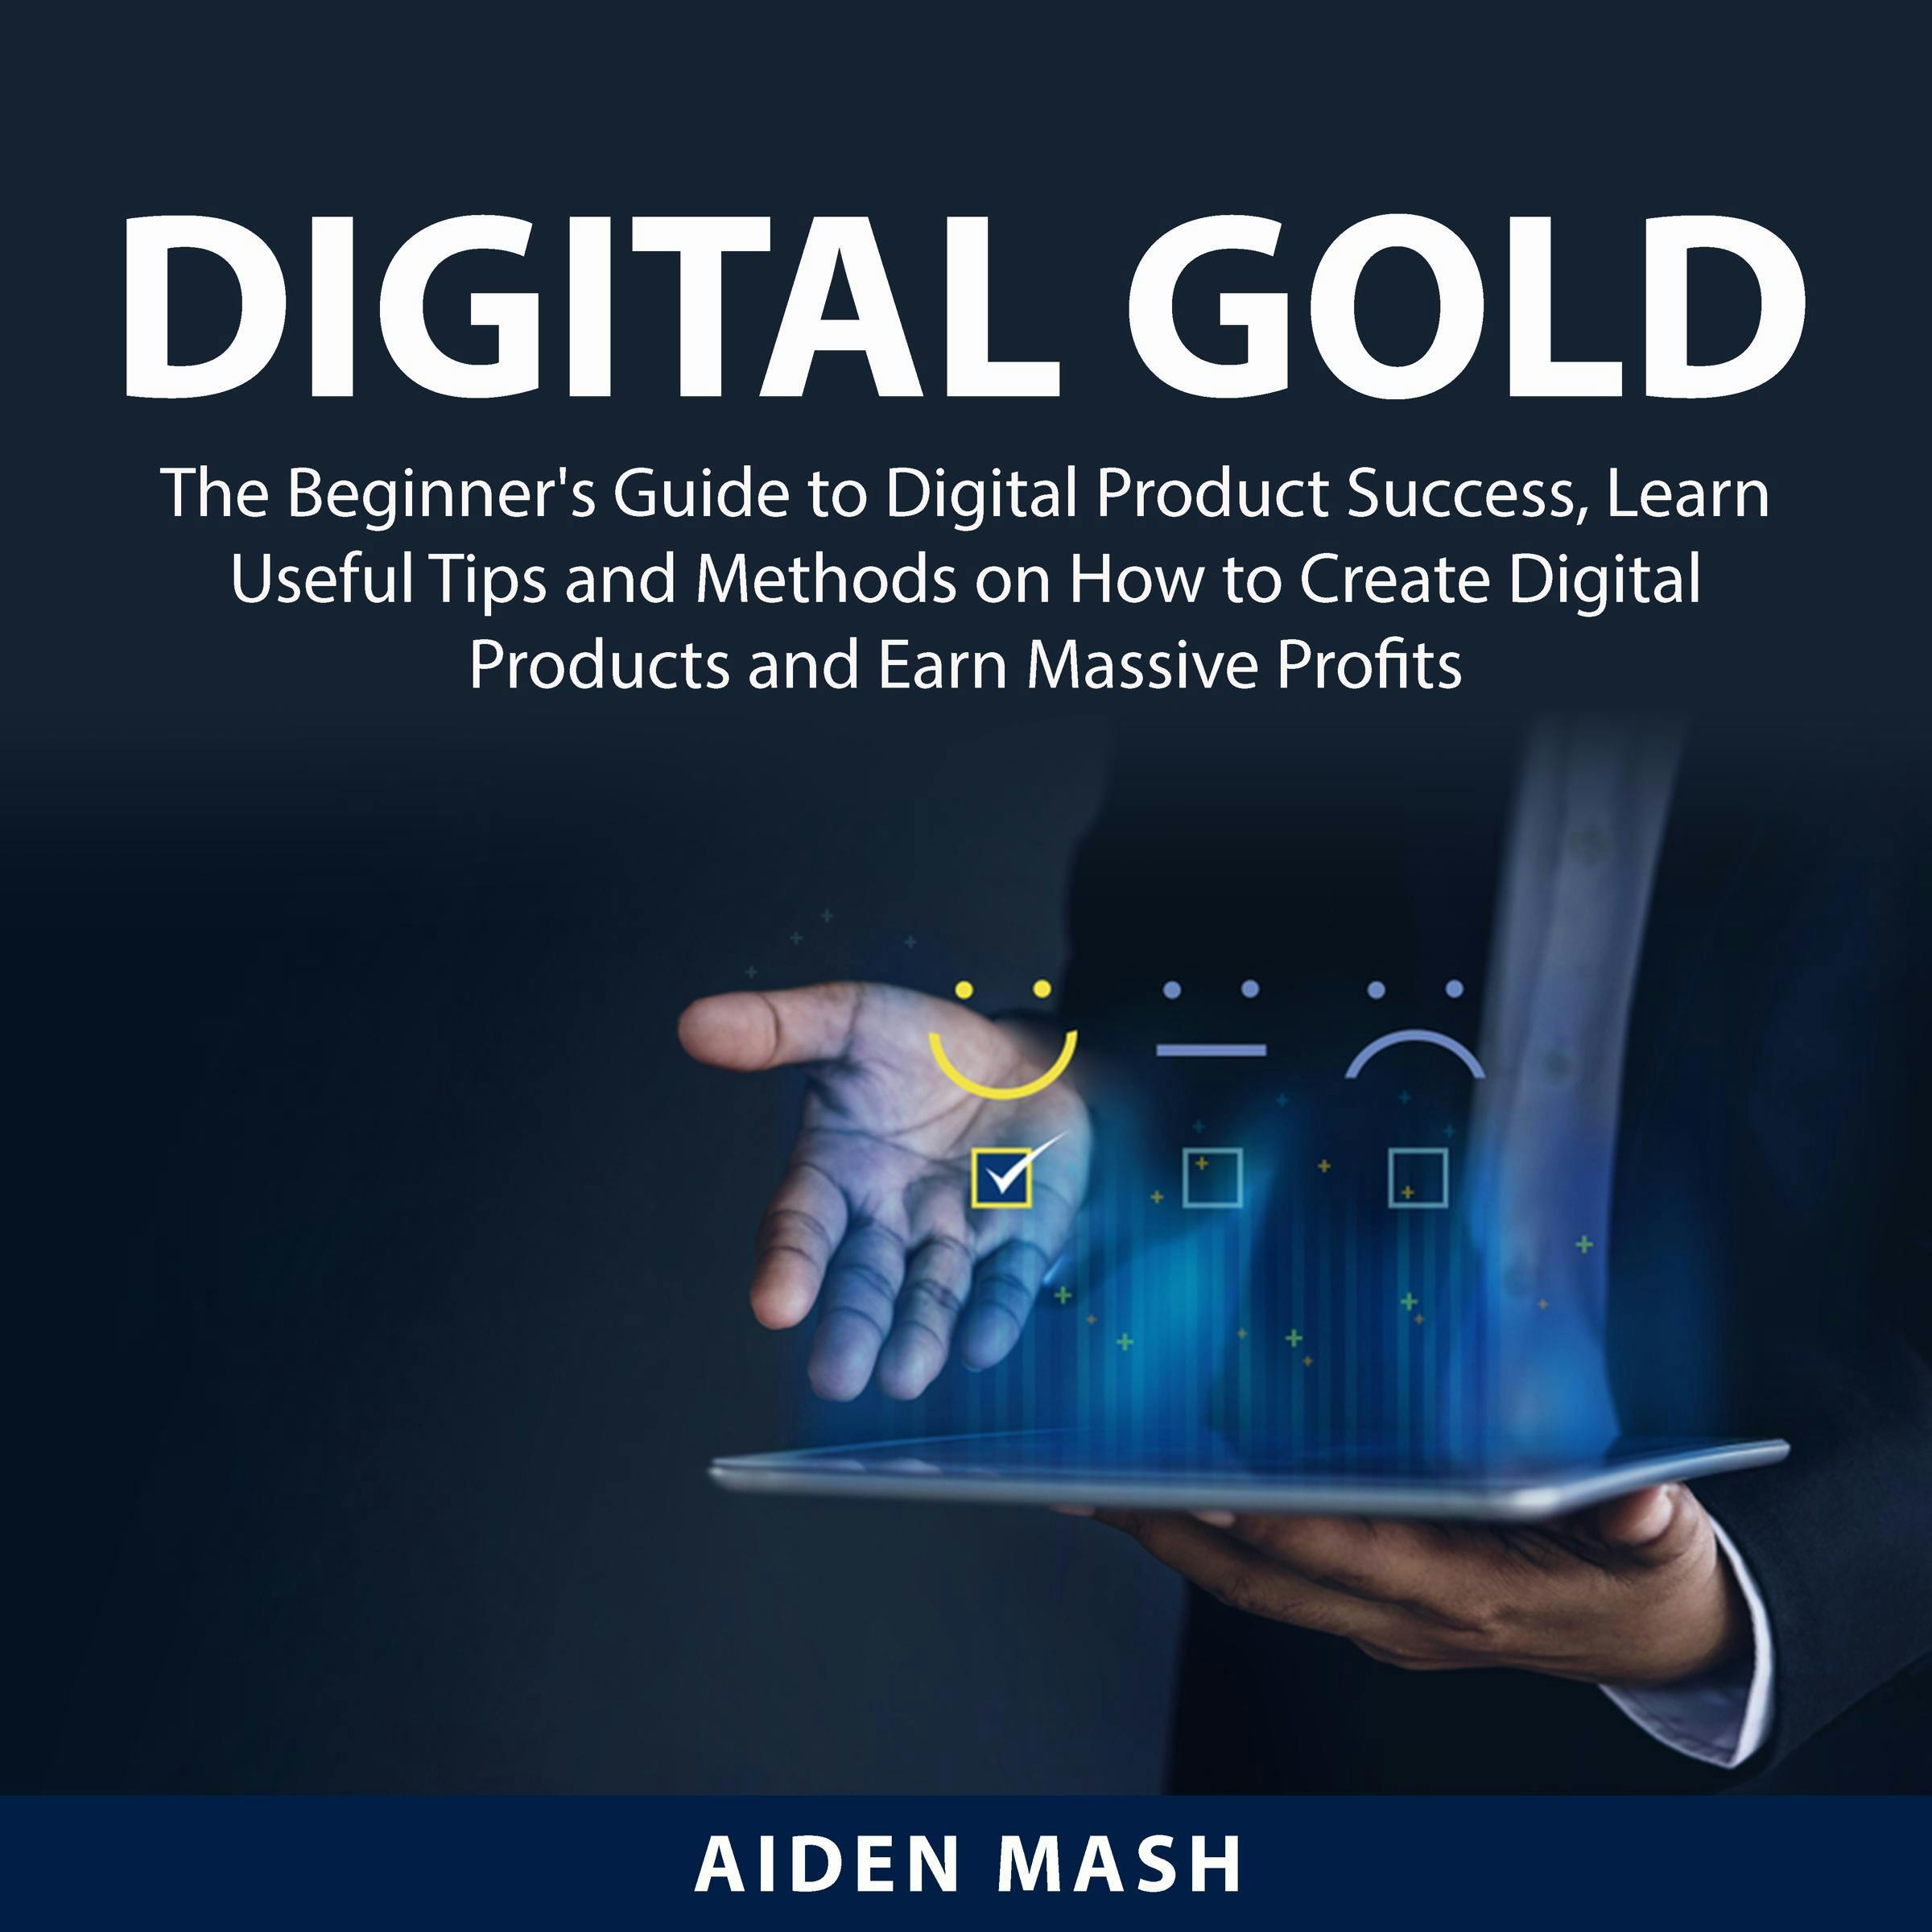 Digital Gold: The Beginner's Guide to Digital Product Success, Learn Useful Tips and Methods on How to Create Digital Products and Earn Massive Profits - Aiden Mash